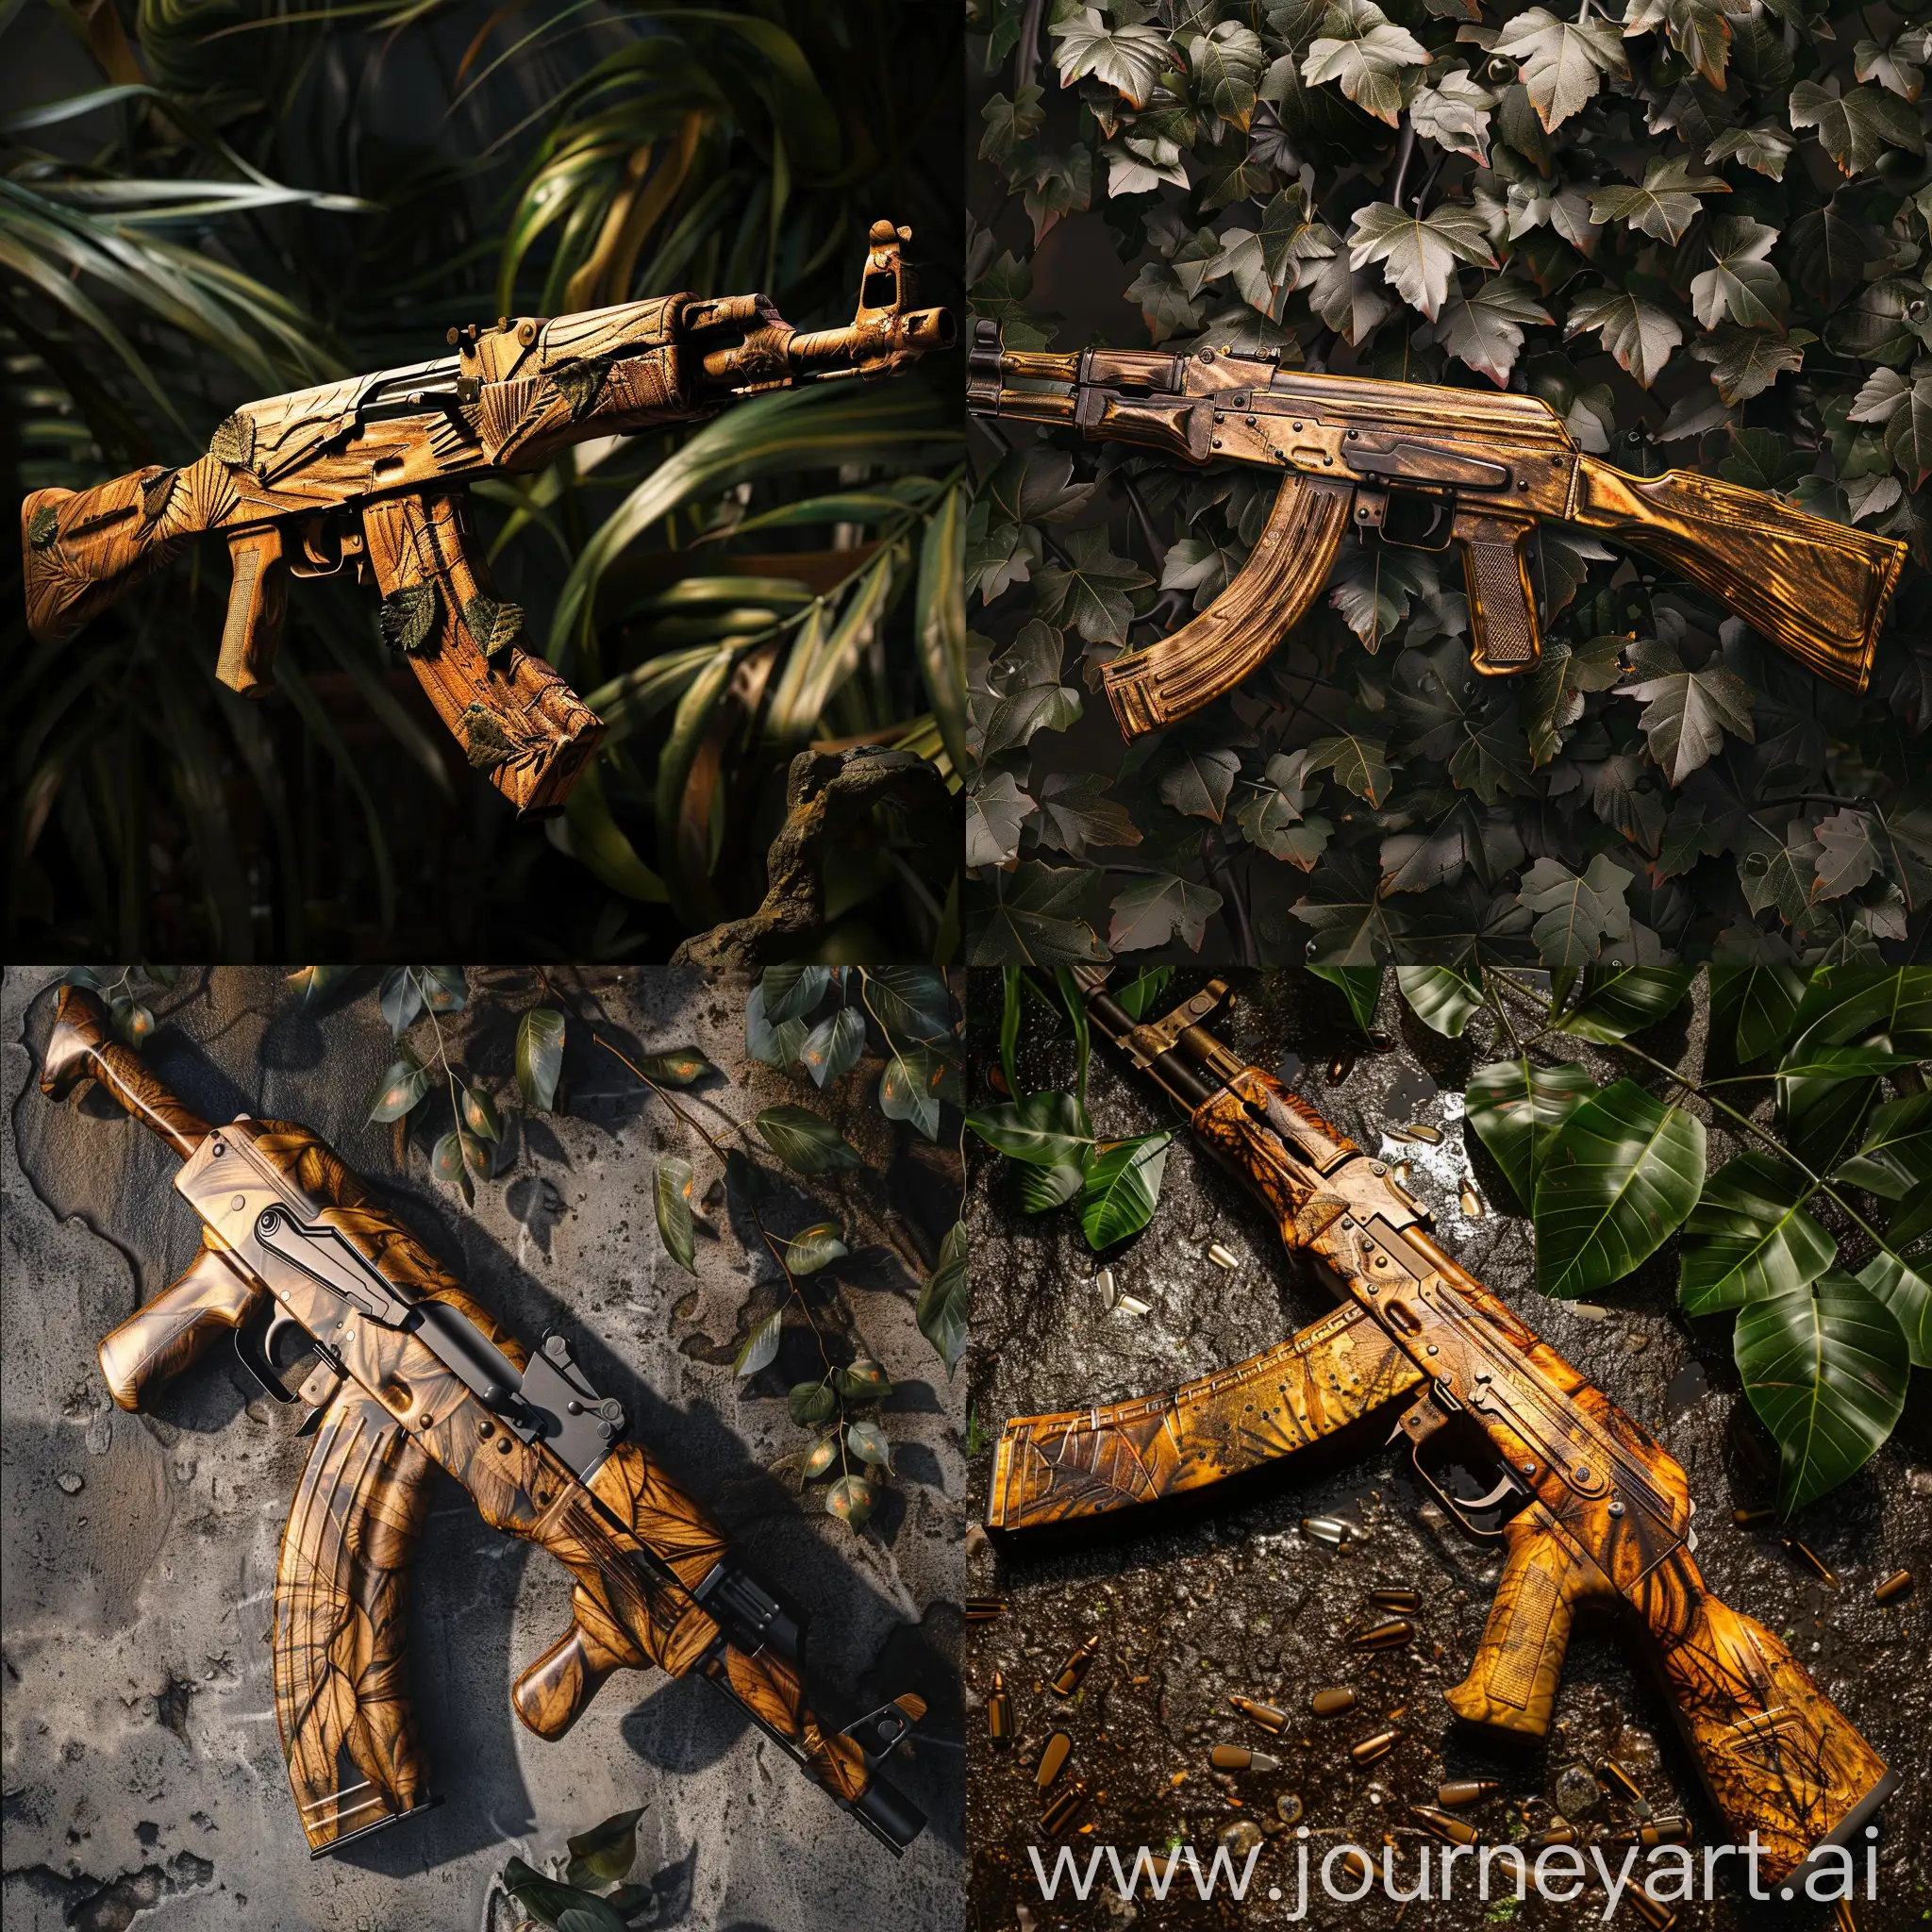 A beautiful ak 47 skin, which is made of wood and tree leaves and is very beautiful and shiny, with high quality and detailed details.